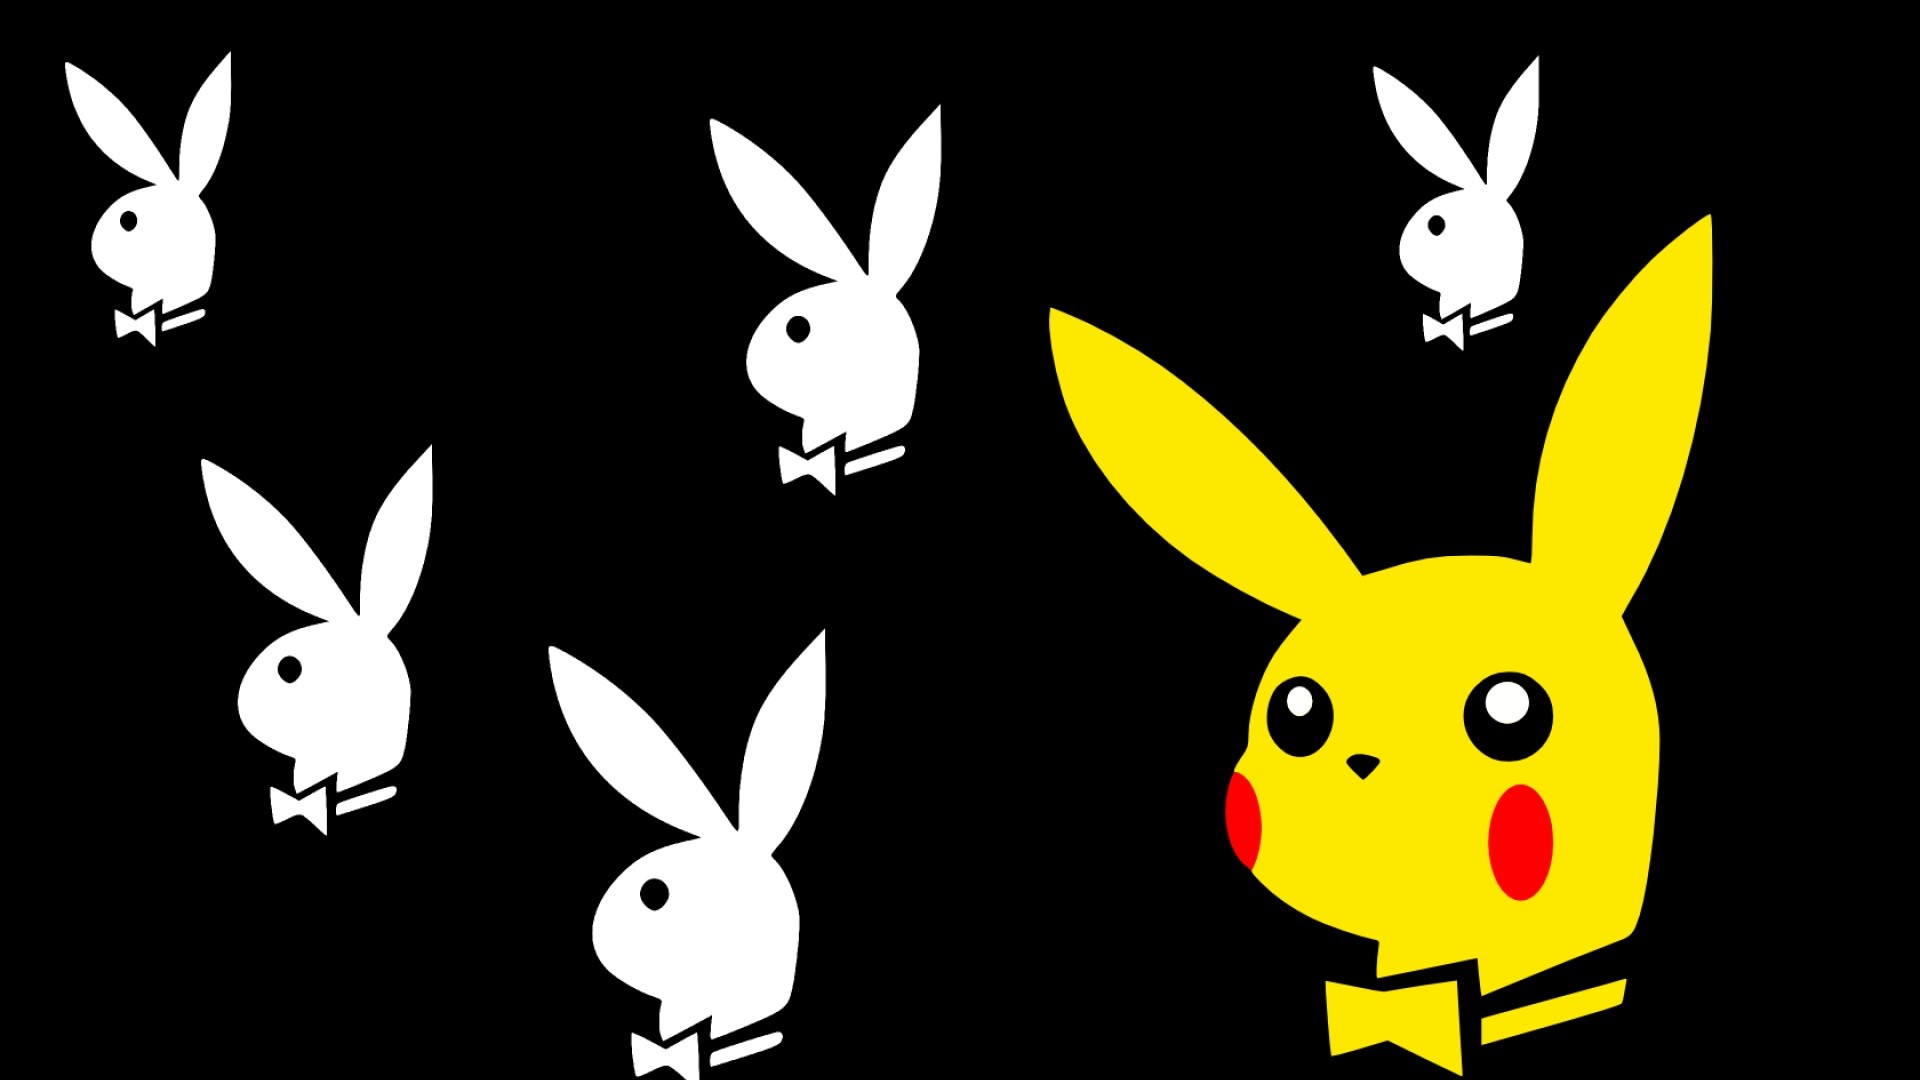 1920x1080  Pikachu Playboy. How to set wallpaper on your desktop? Click the  download link from above and set the wallpaper on the desktop from your OS.